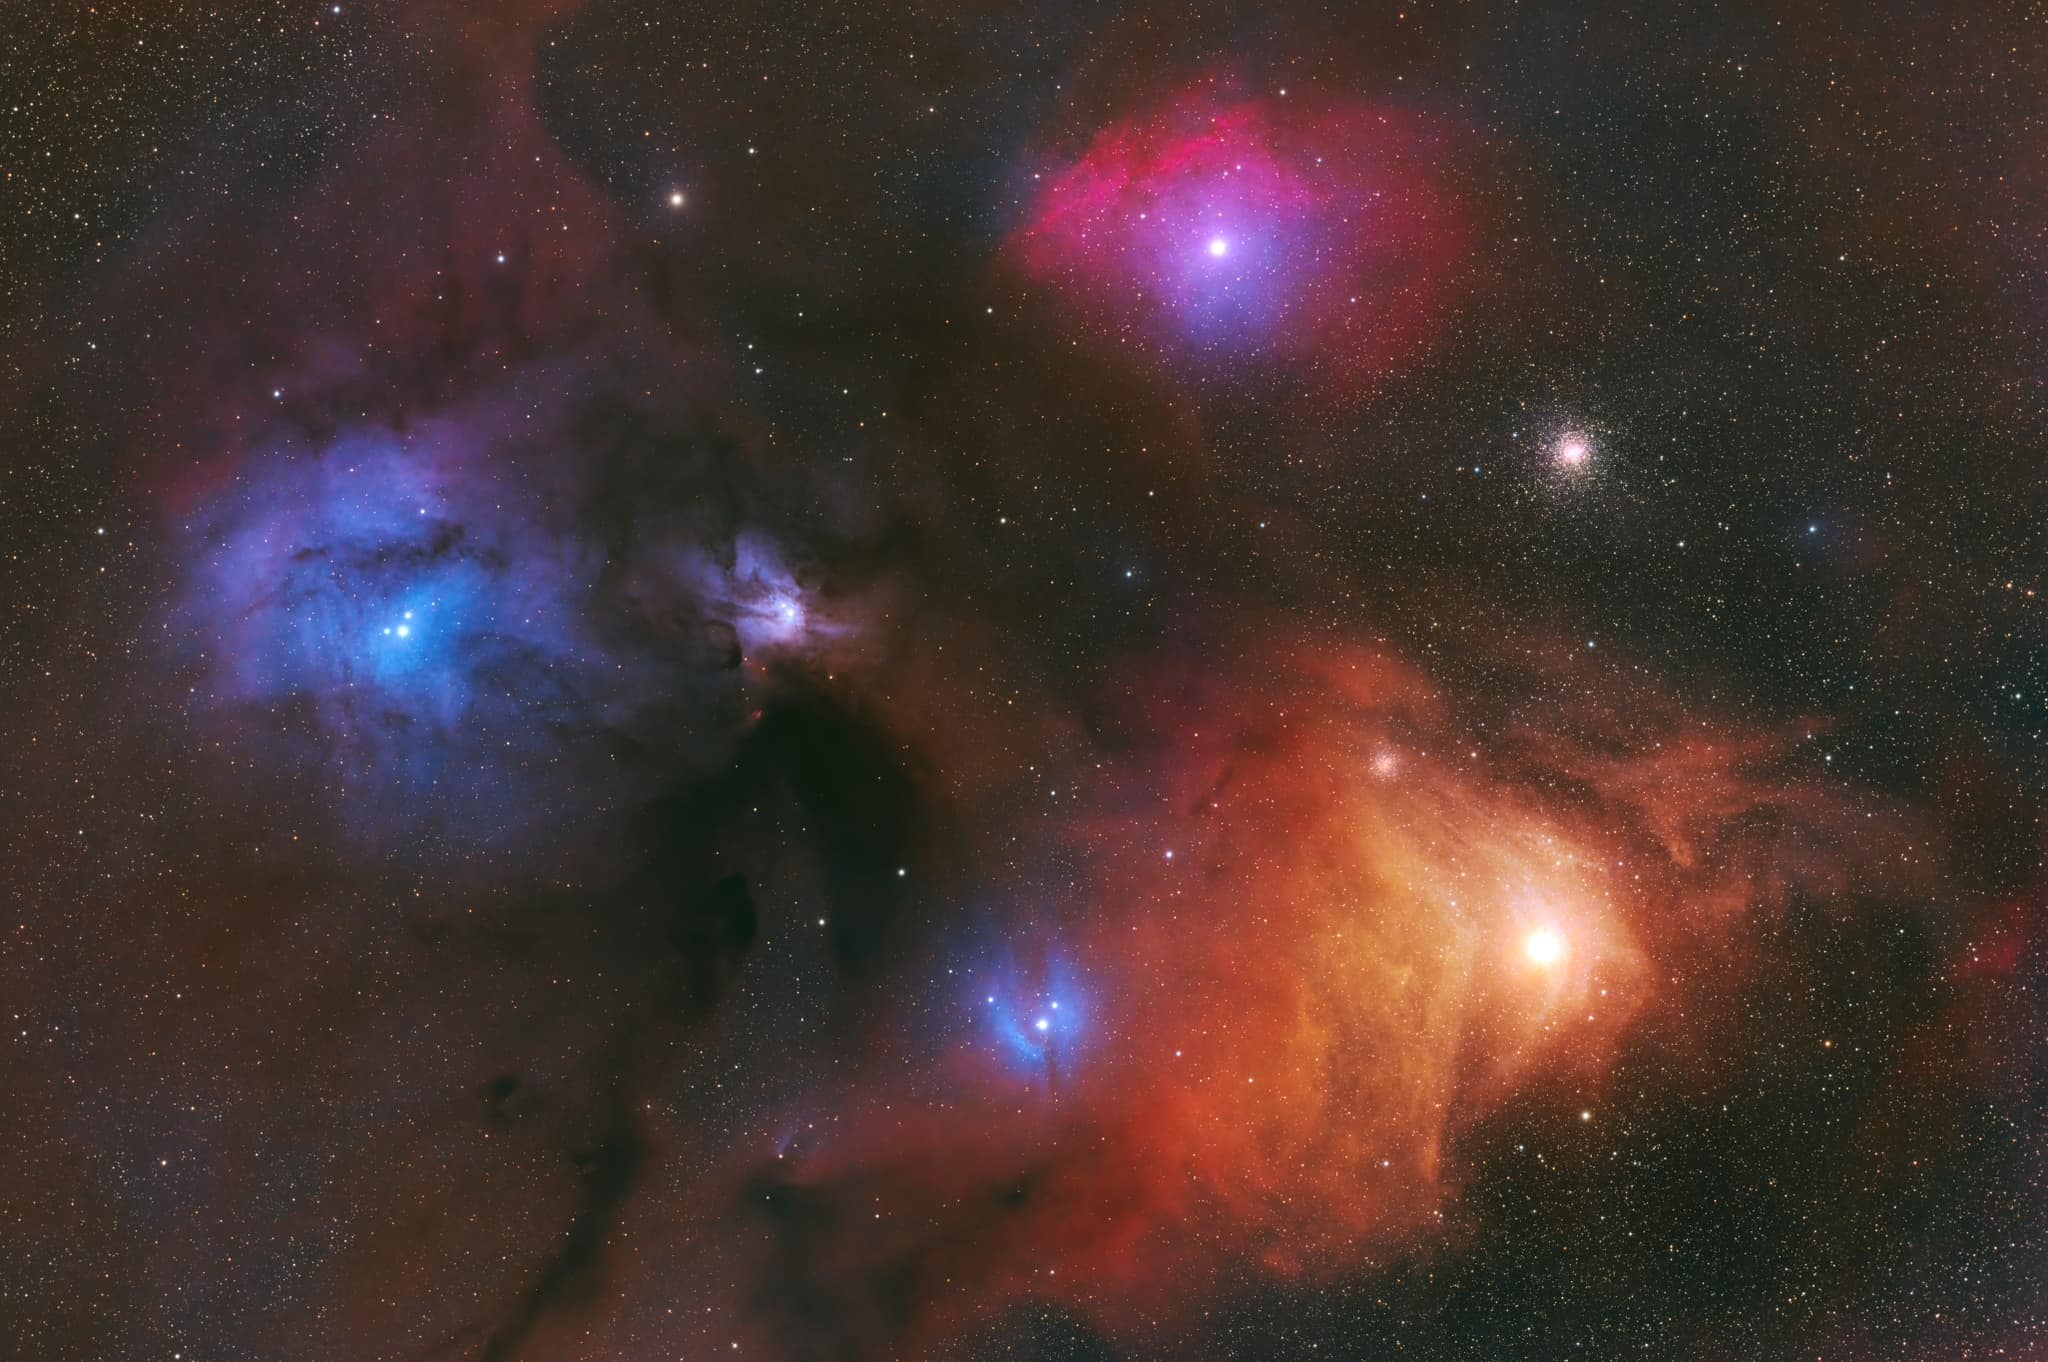 TOP 10 Astrophotos Of The Week: Messier 106, Flaming Star Nebula, And More! [7th-14th June]